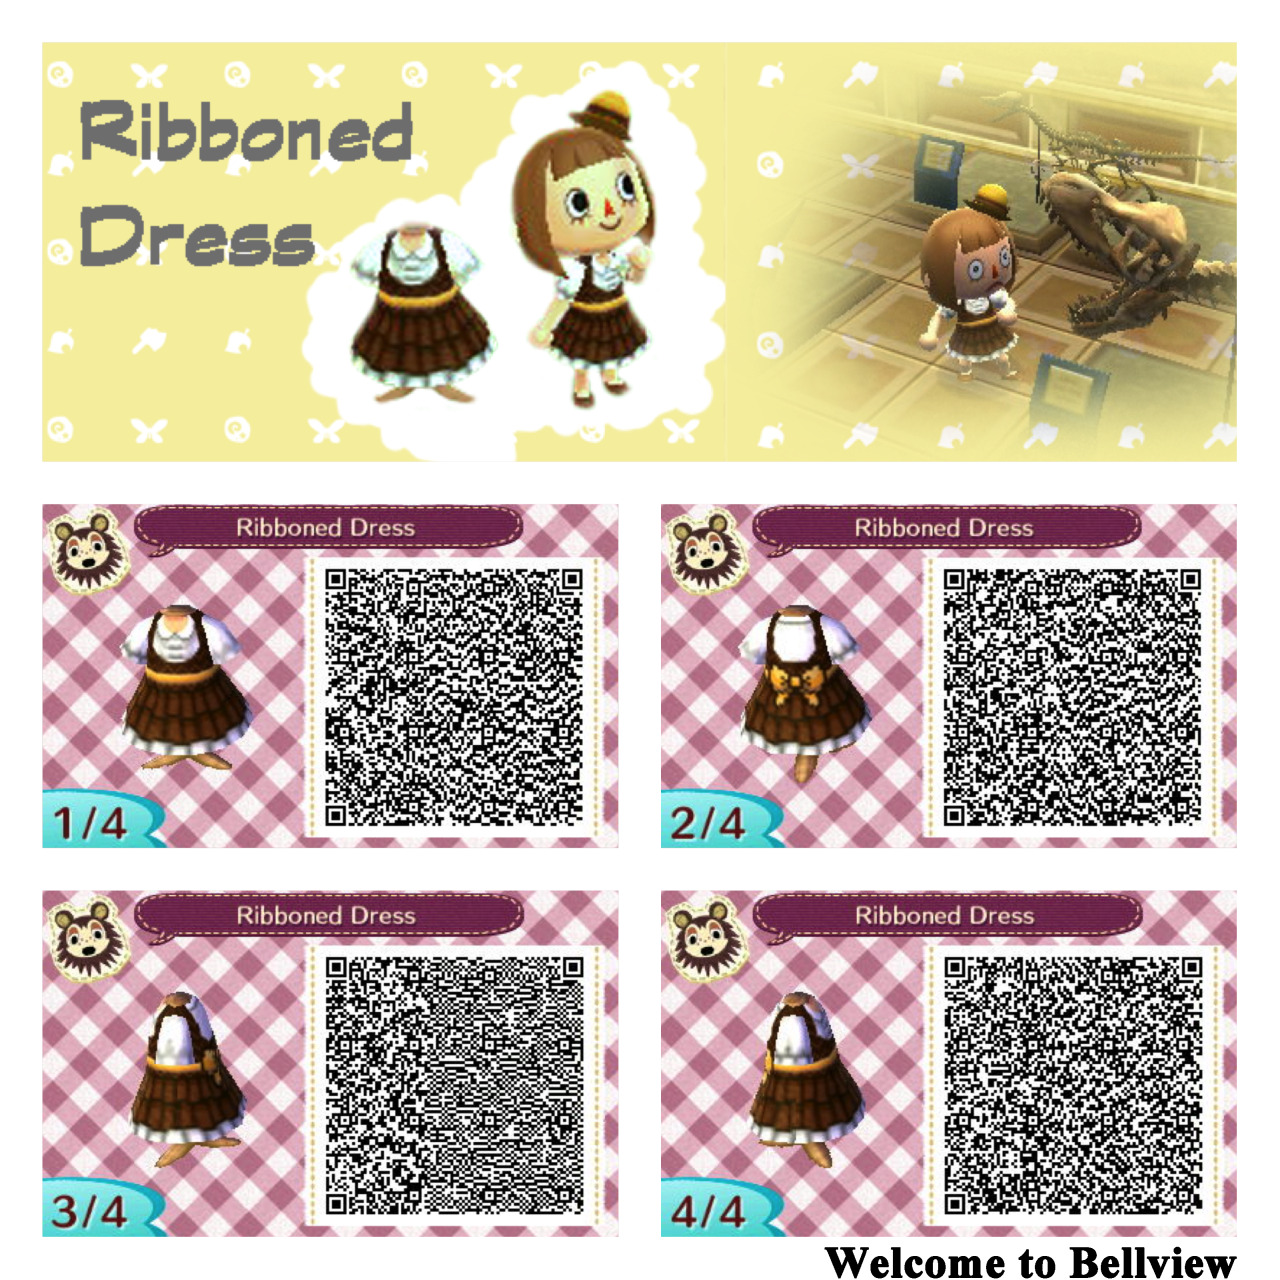 Welcome to Bellview (Here is another animal crossing QR code for you!...)